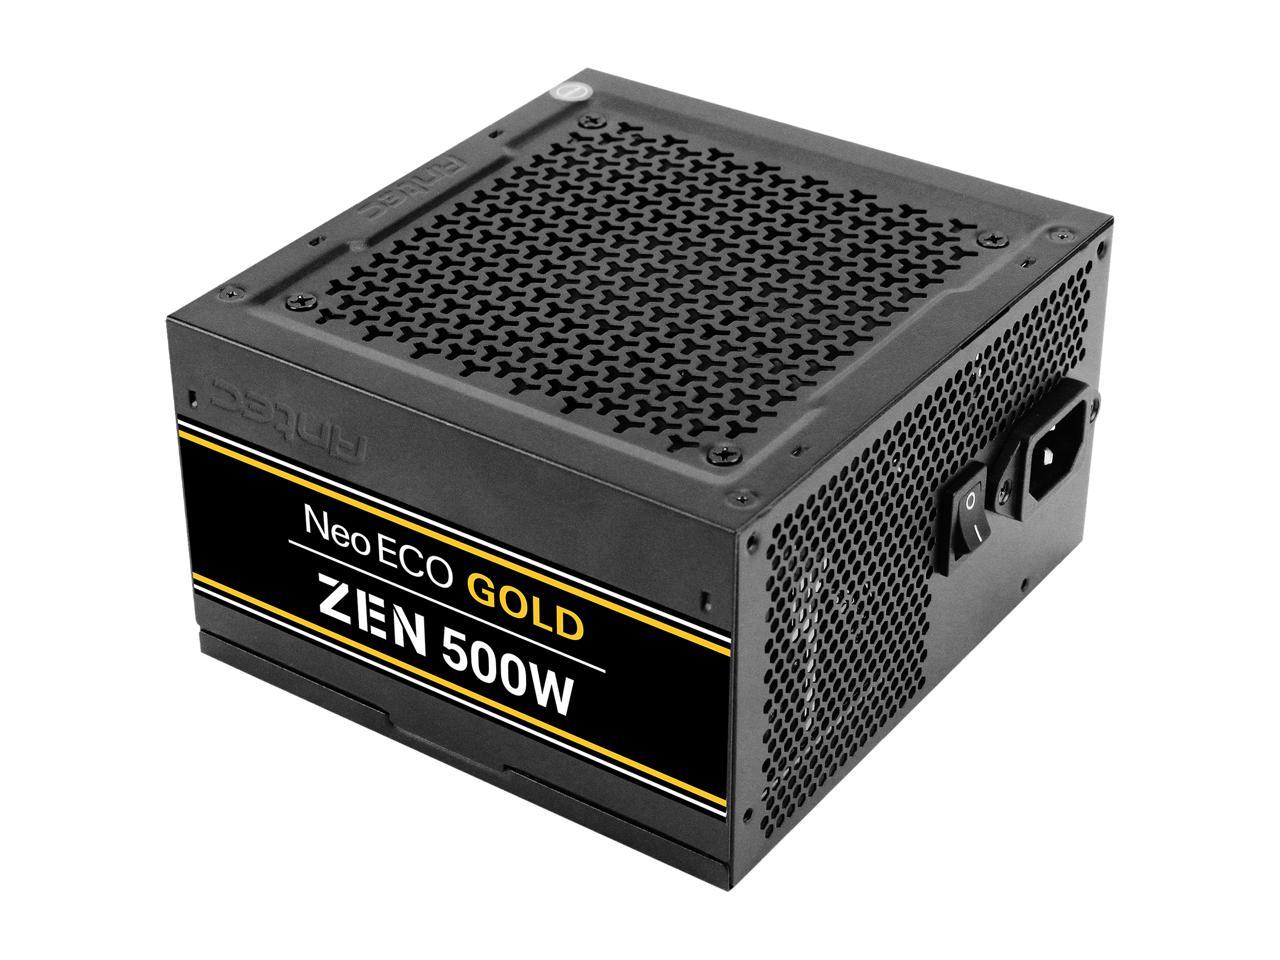 Antec NeoECO Gold Zen NE500G Zen Power Supply 500W, 80 PLUS GOLD Certified with 120mm Silent Fan, LLC + DC to DC Design, Japanese Caps, CircuitShield Protection, 5-Year Warranty